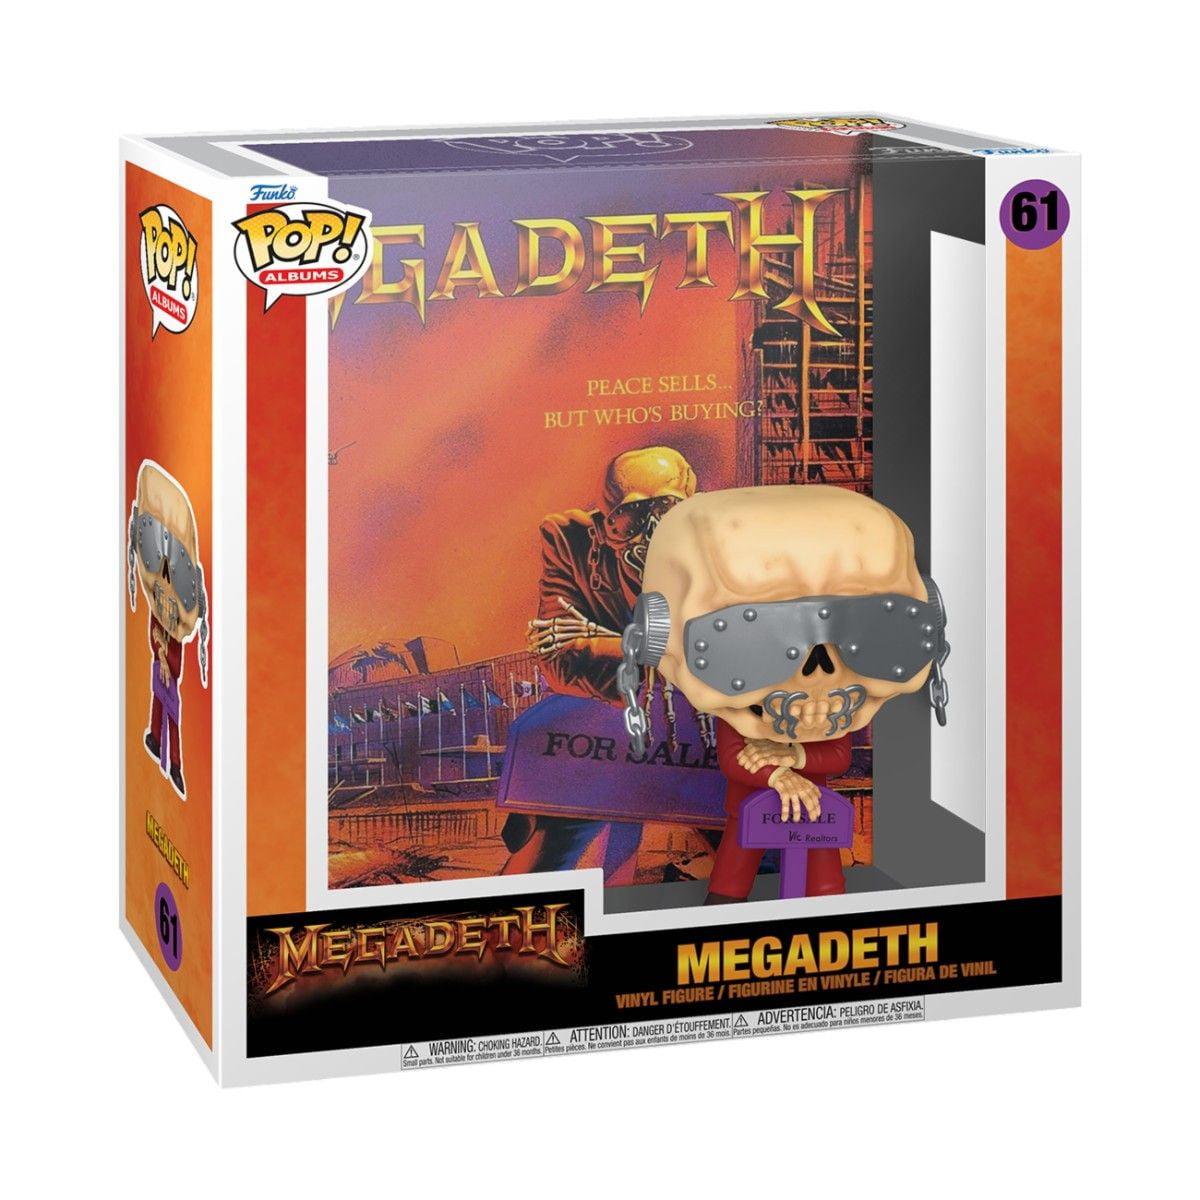 Peace Sells... but Who's Buying? - Megadeath - Funko POP! Album (61)